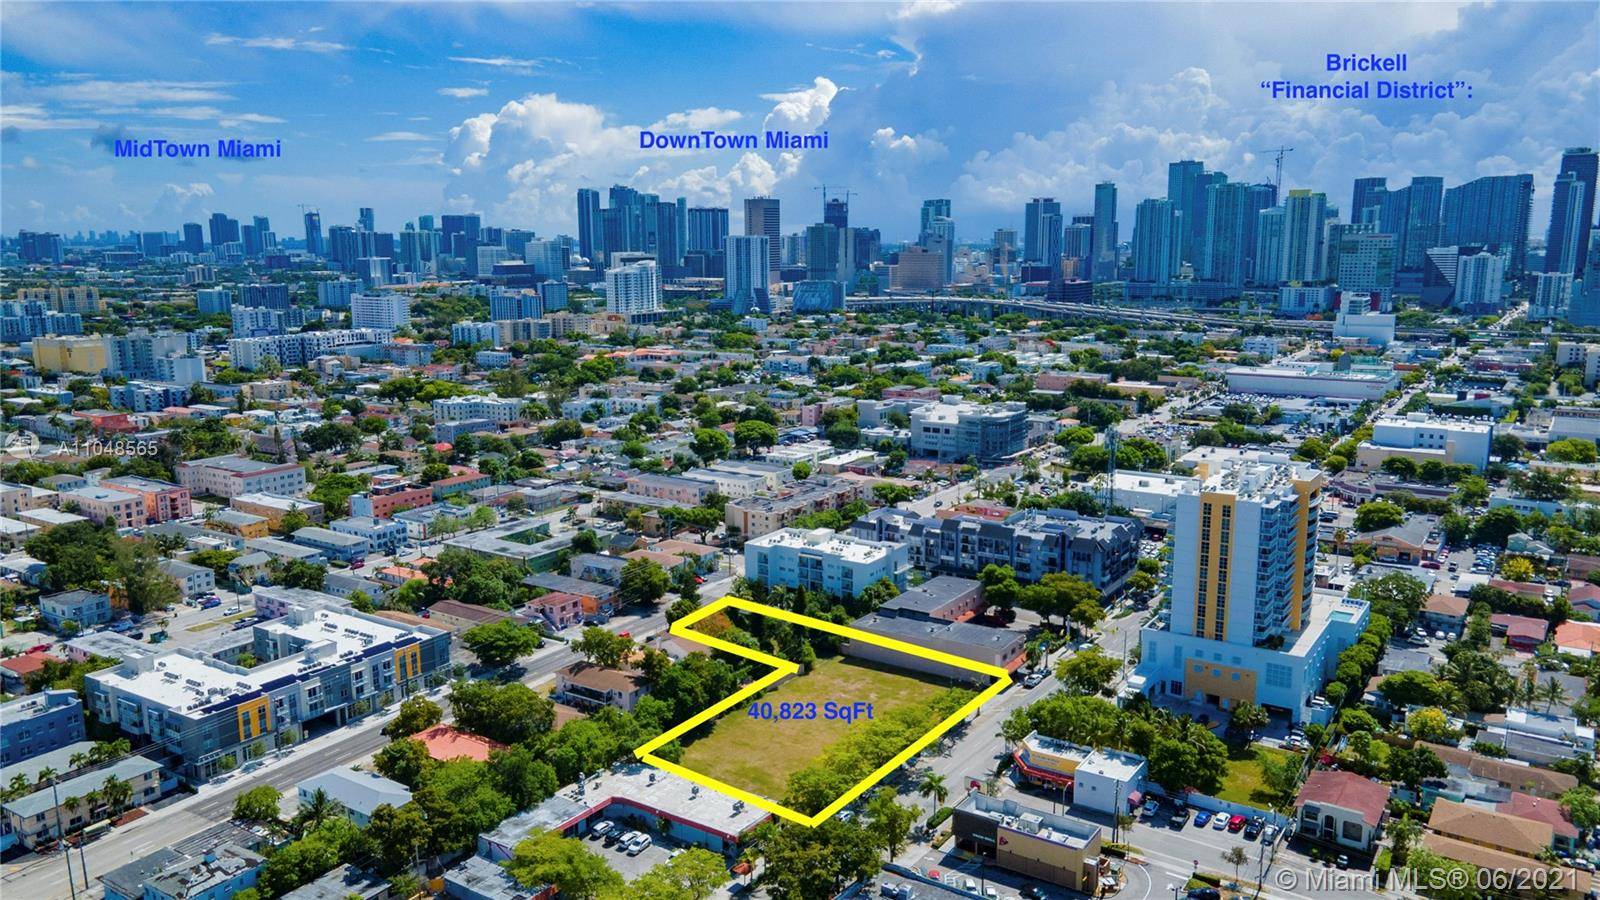 PG Capital Realty is pleased to exclusively offer this great Mixed Use Development Site in Little Havana West Brickell area.